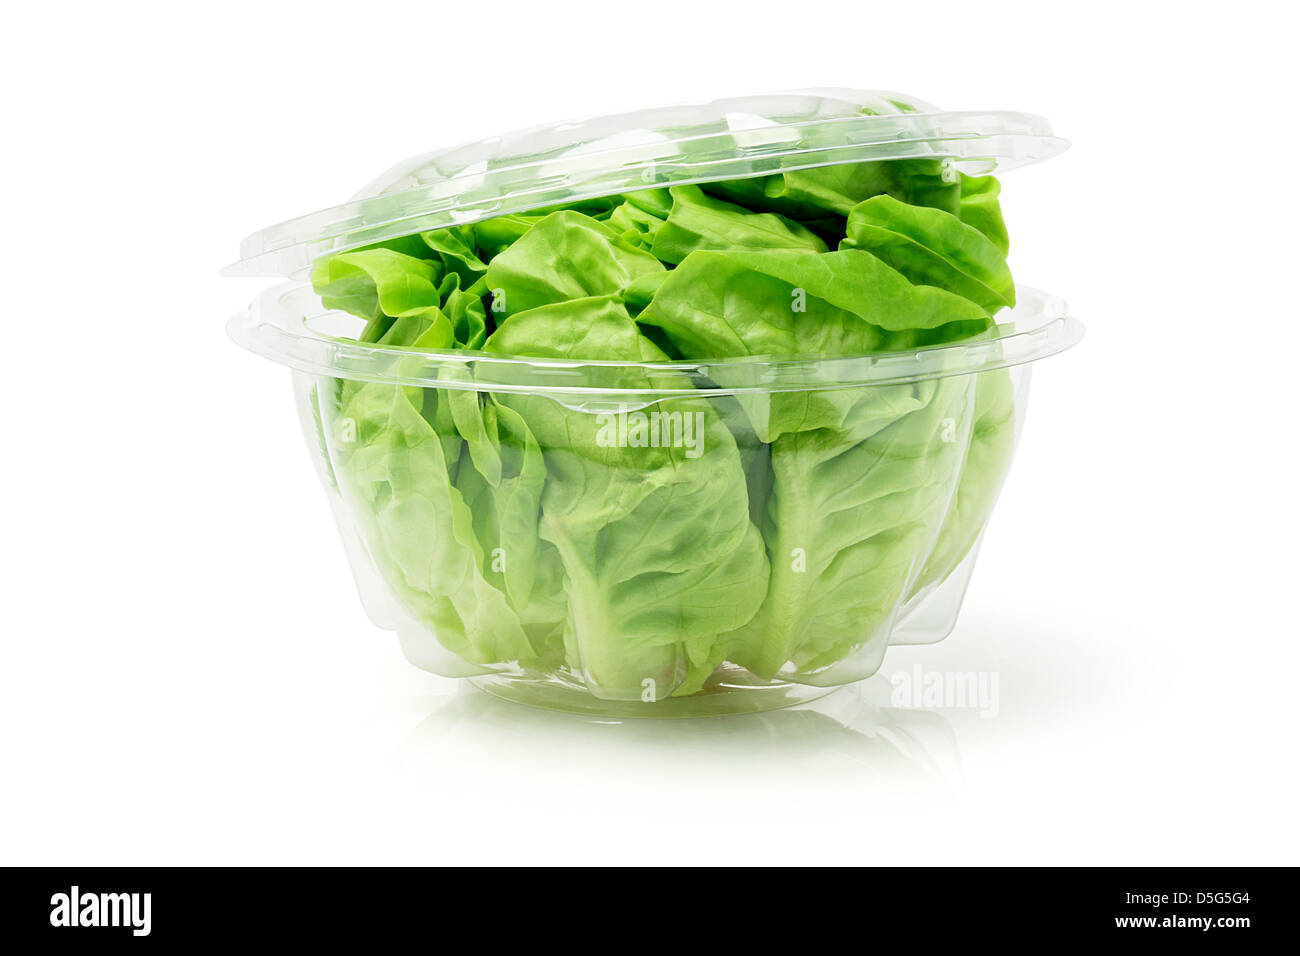 Download Green Lettuce In Open Plastic Container On White Background Stock Photo Alamy Yellowimages Mockups